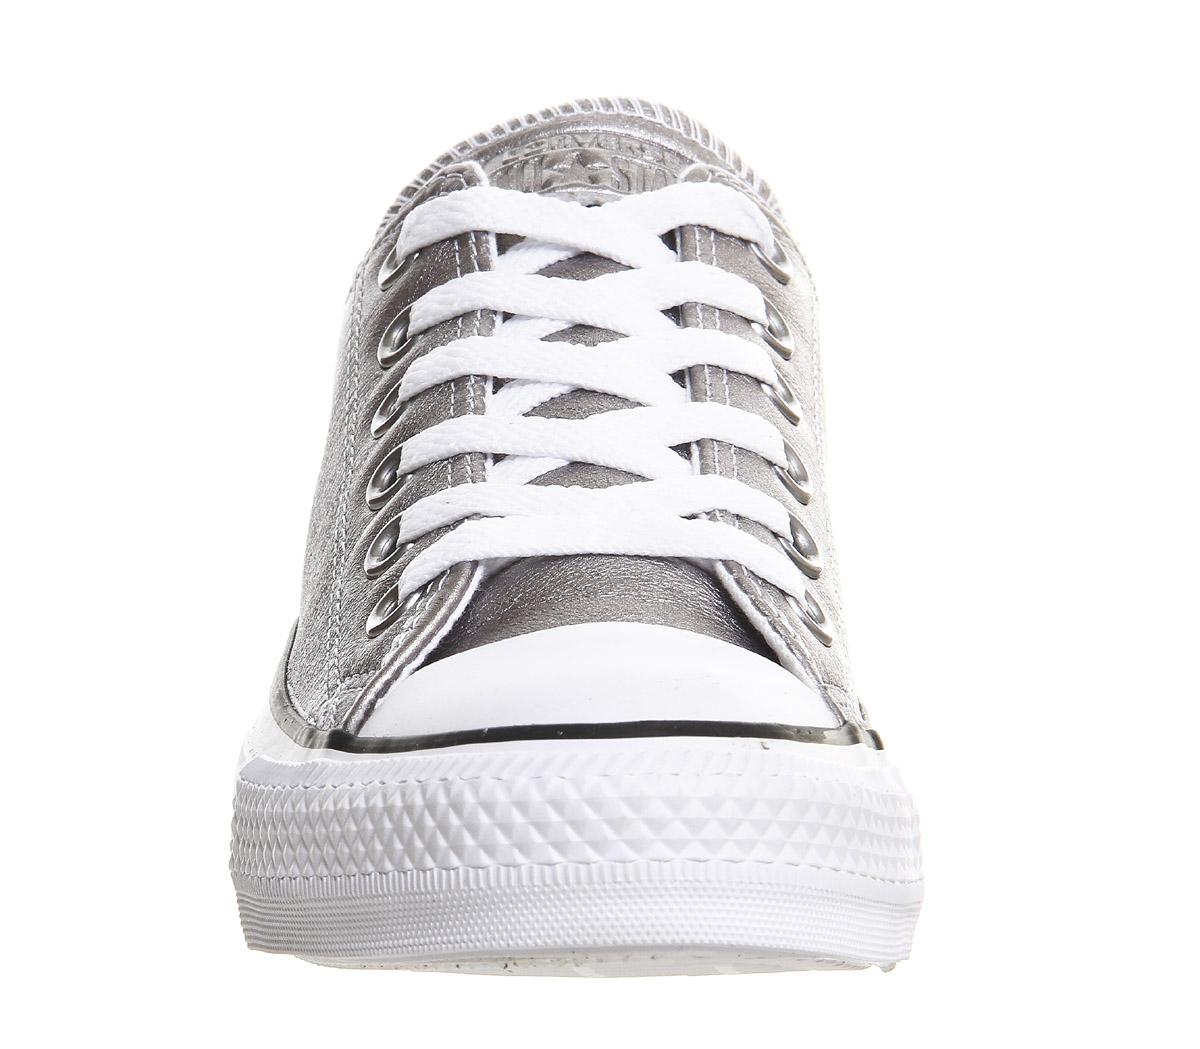 converse all star low leather new silver